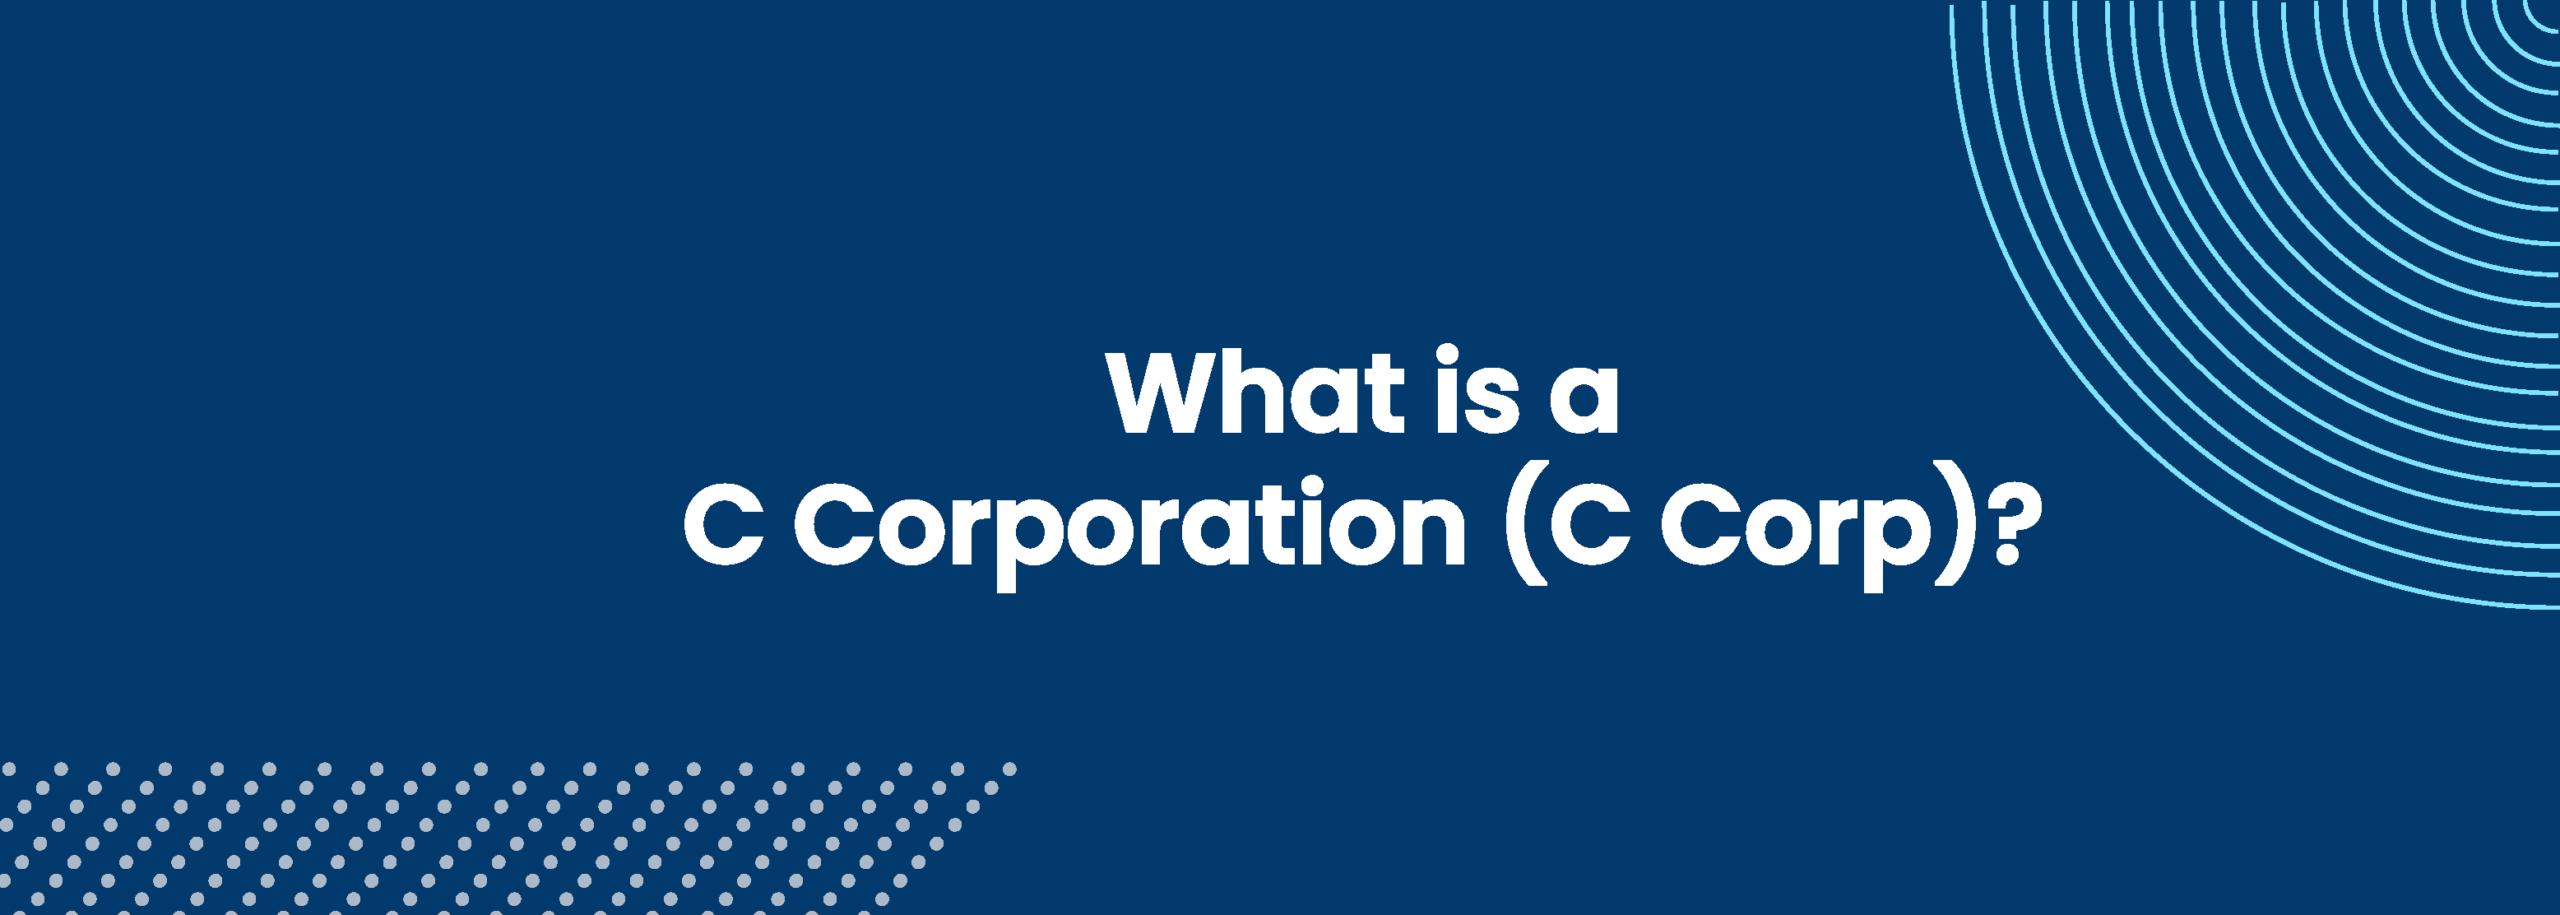 A C corporation (or C corp) is a legal structure for a business in which the owners, or shareholders, are taxed independently from the corporation.